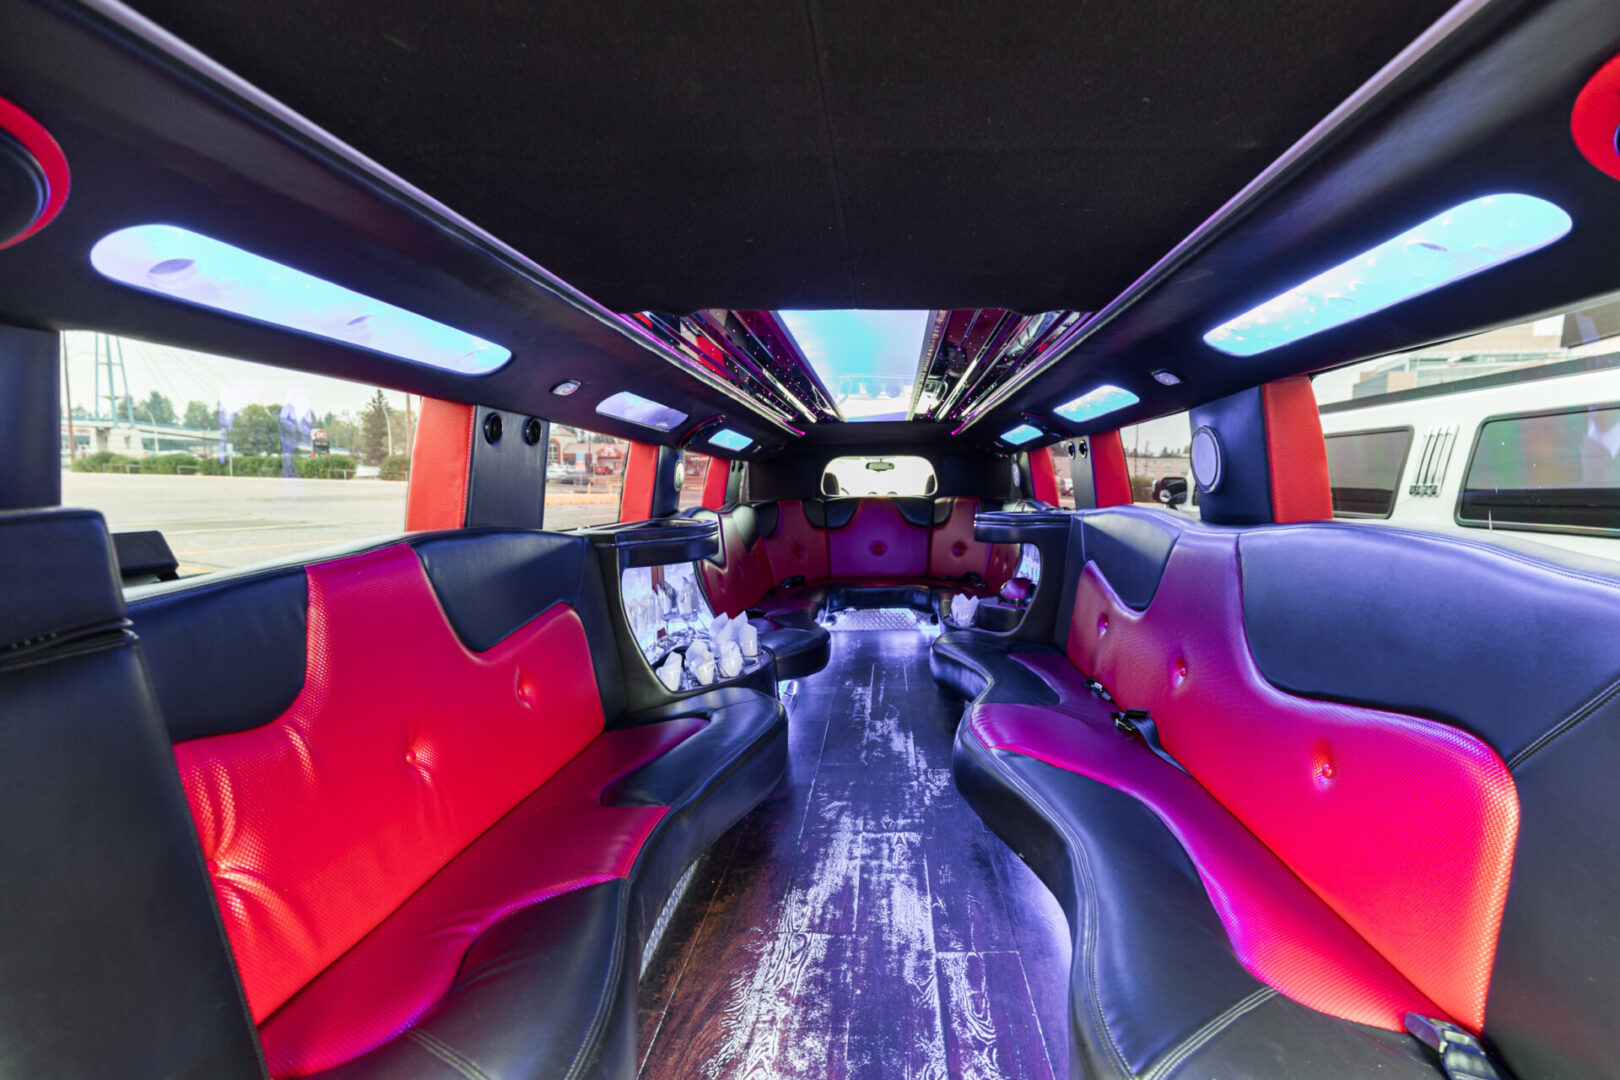 A view of the back of a limo car.